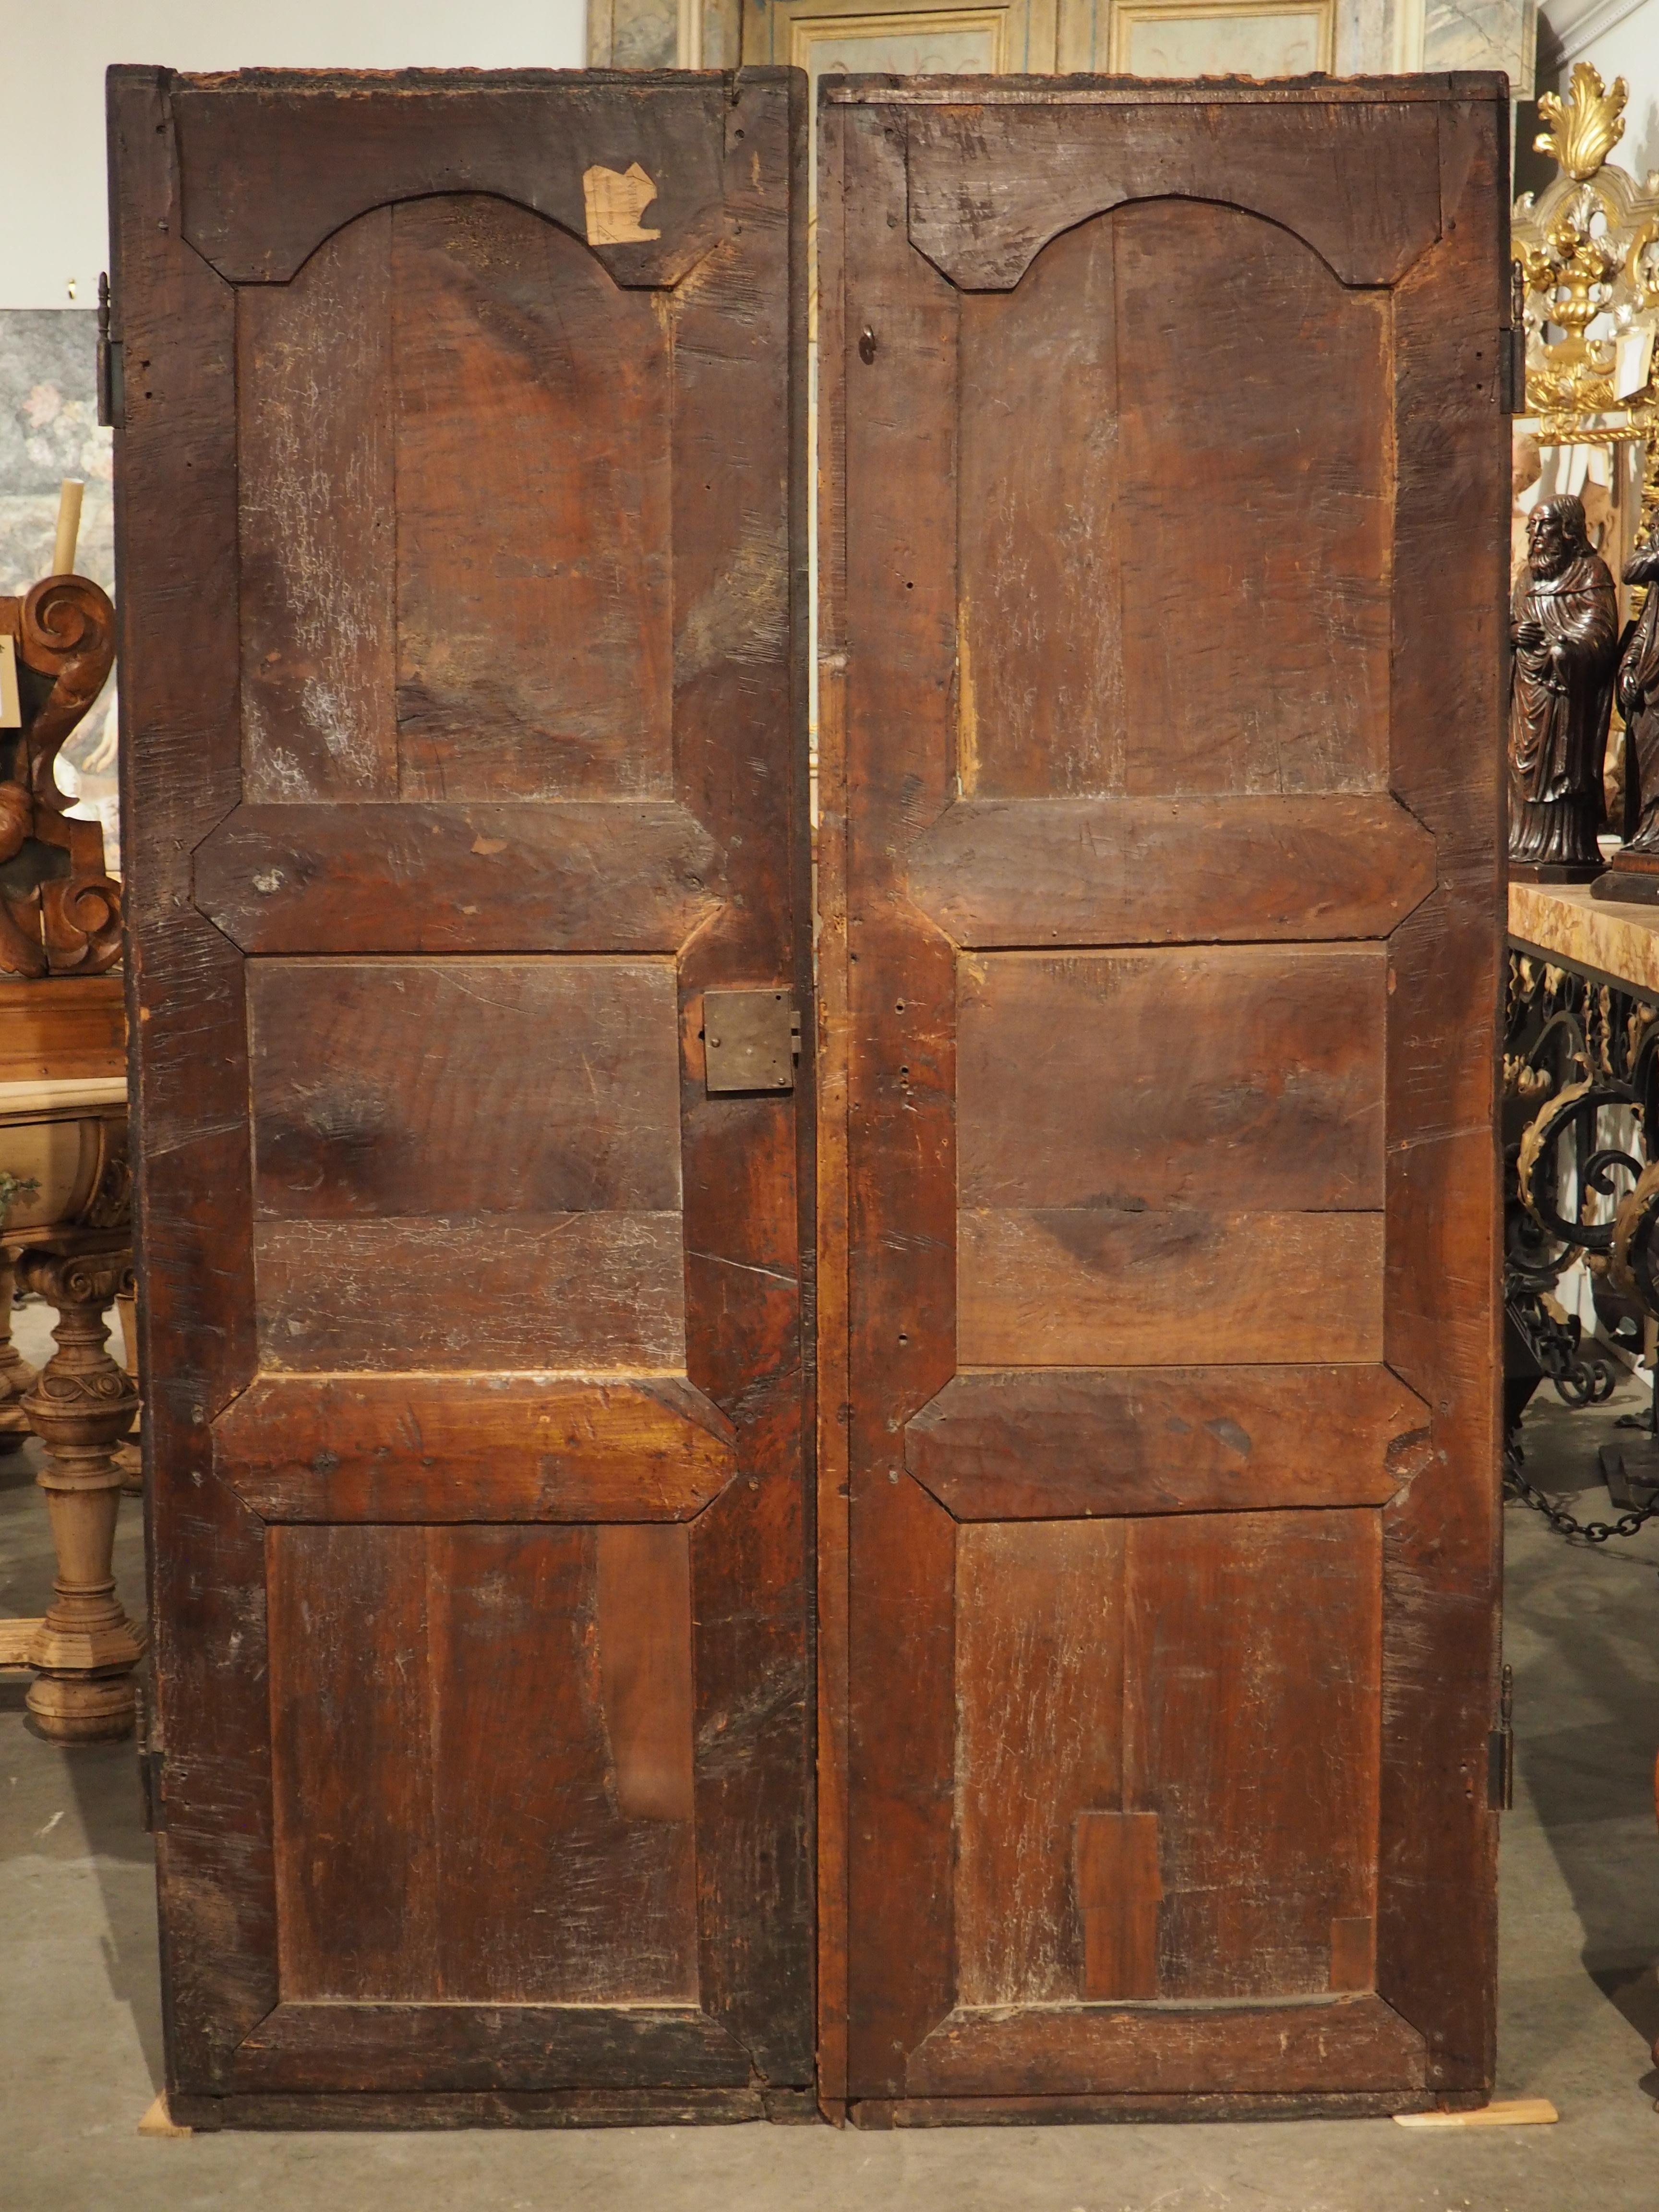 Pair of Antique Cherry Wood Armoire Doors from Rennes, France, Circa 1720 9